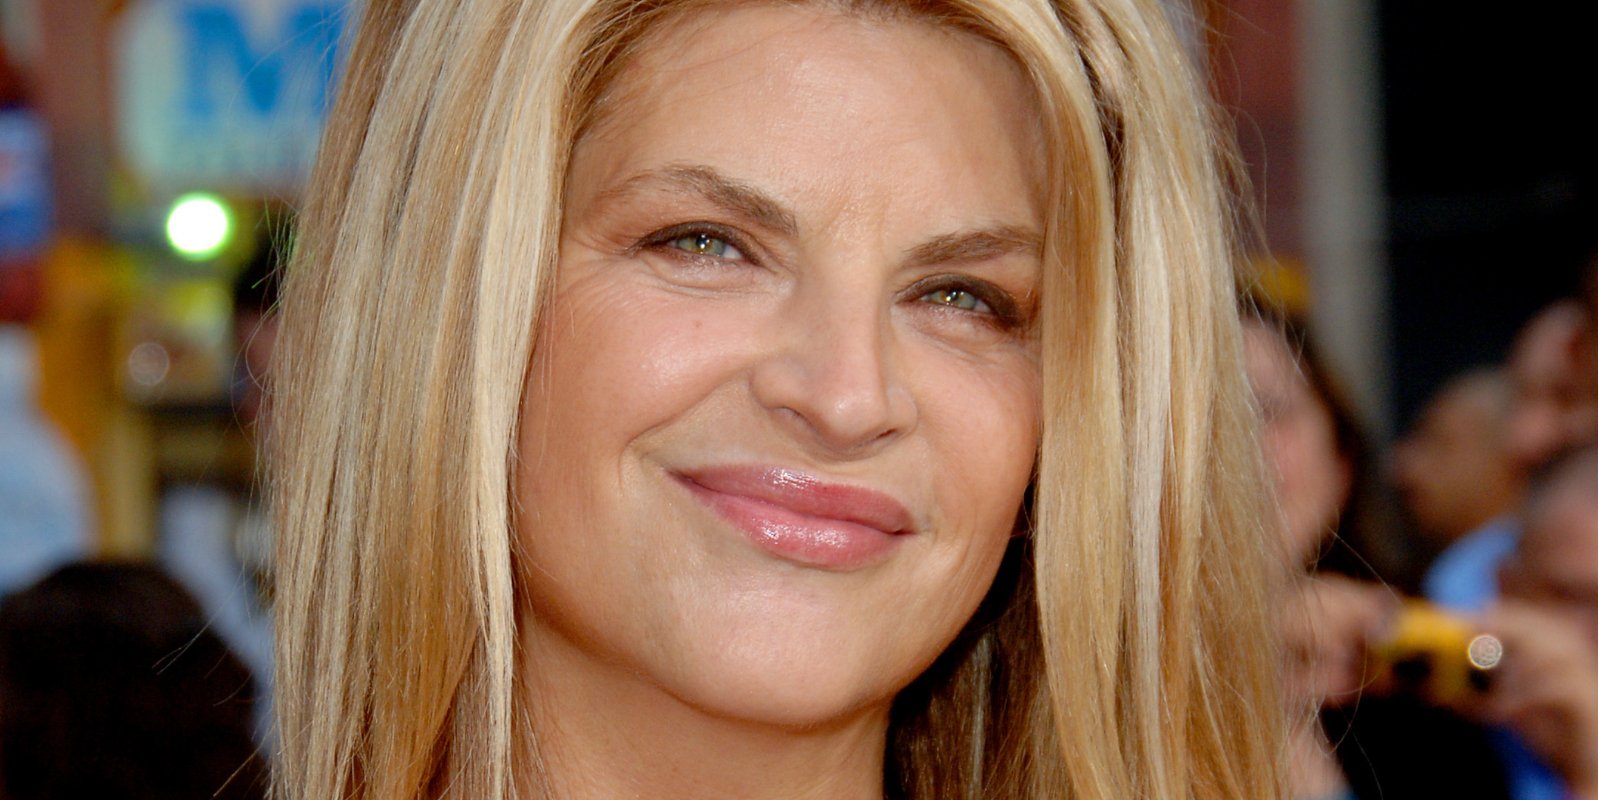 Kirstie Alley poses during "Mission: Impossible III" Los Angeles Fan Screening - Arrivals at Chinese Theater in Hollywood, California, United States.